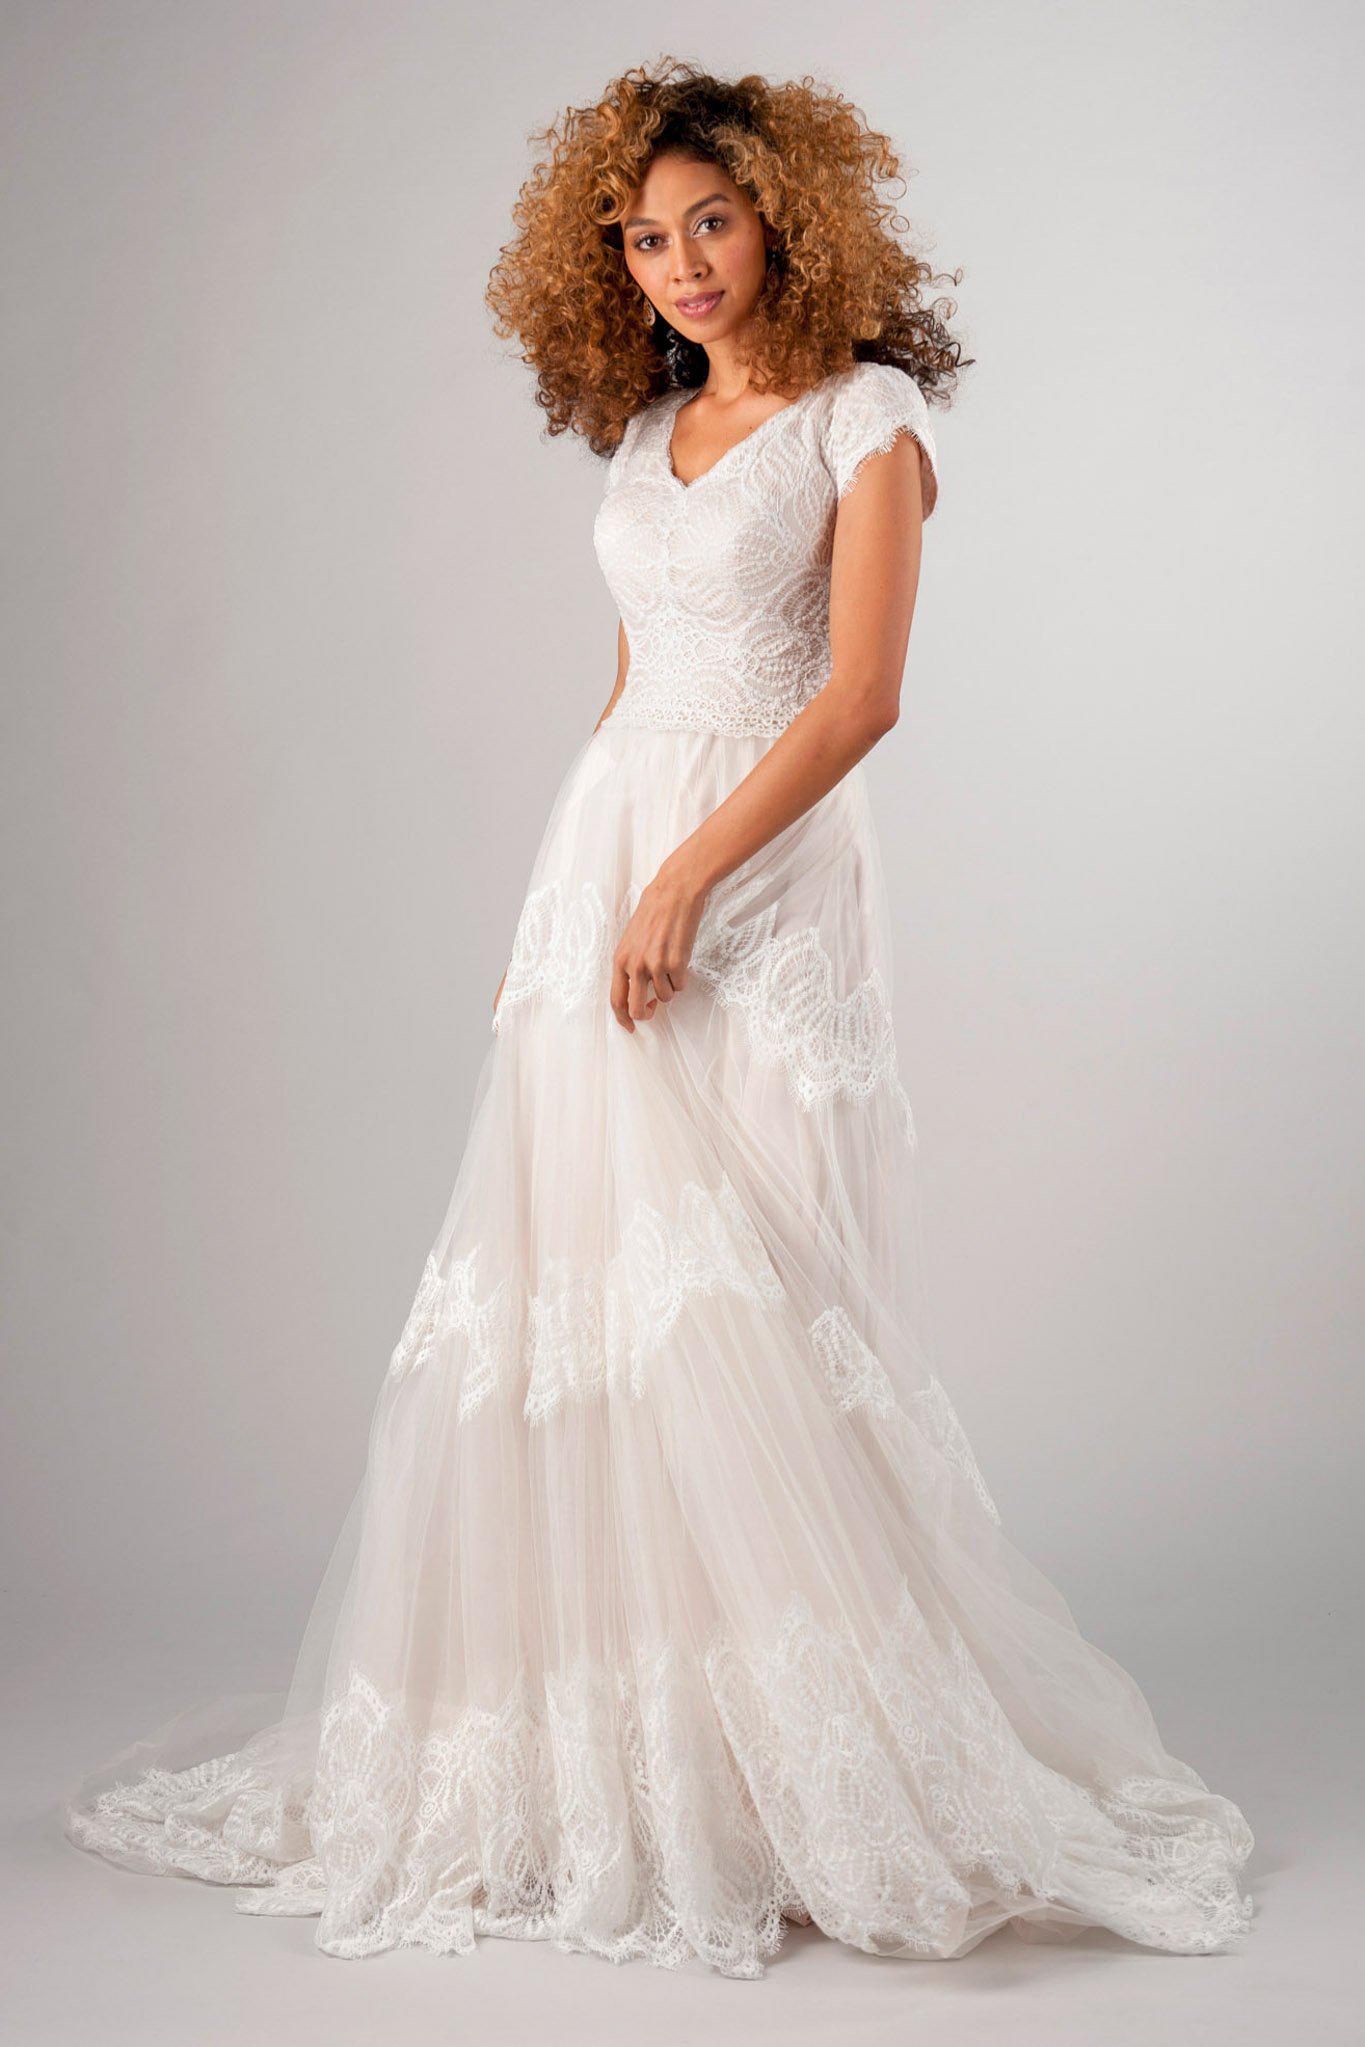 Modern modest wedding dress, style Easton, is part of the LatterDayBride Collection, a Utah wedding dresses.